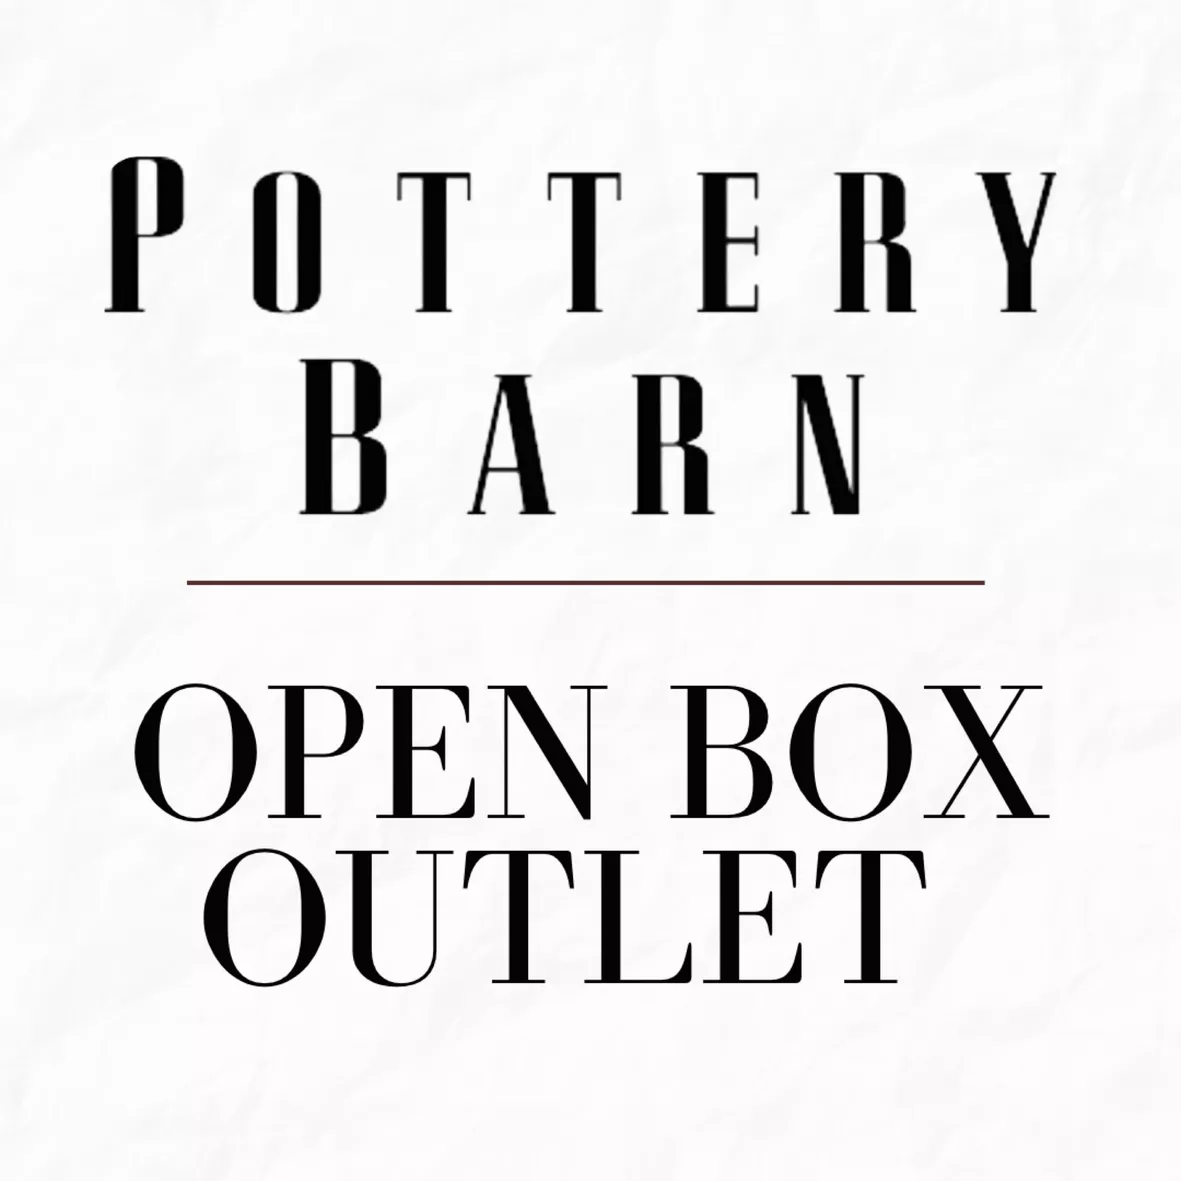 Pottery Barn Outlets added a new photo. - Pottery Barn Outlets